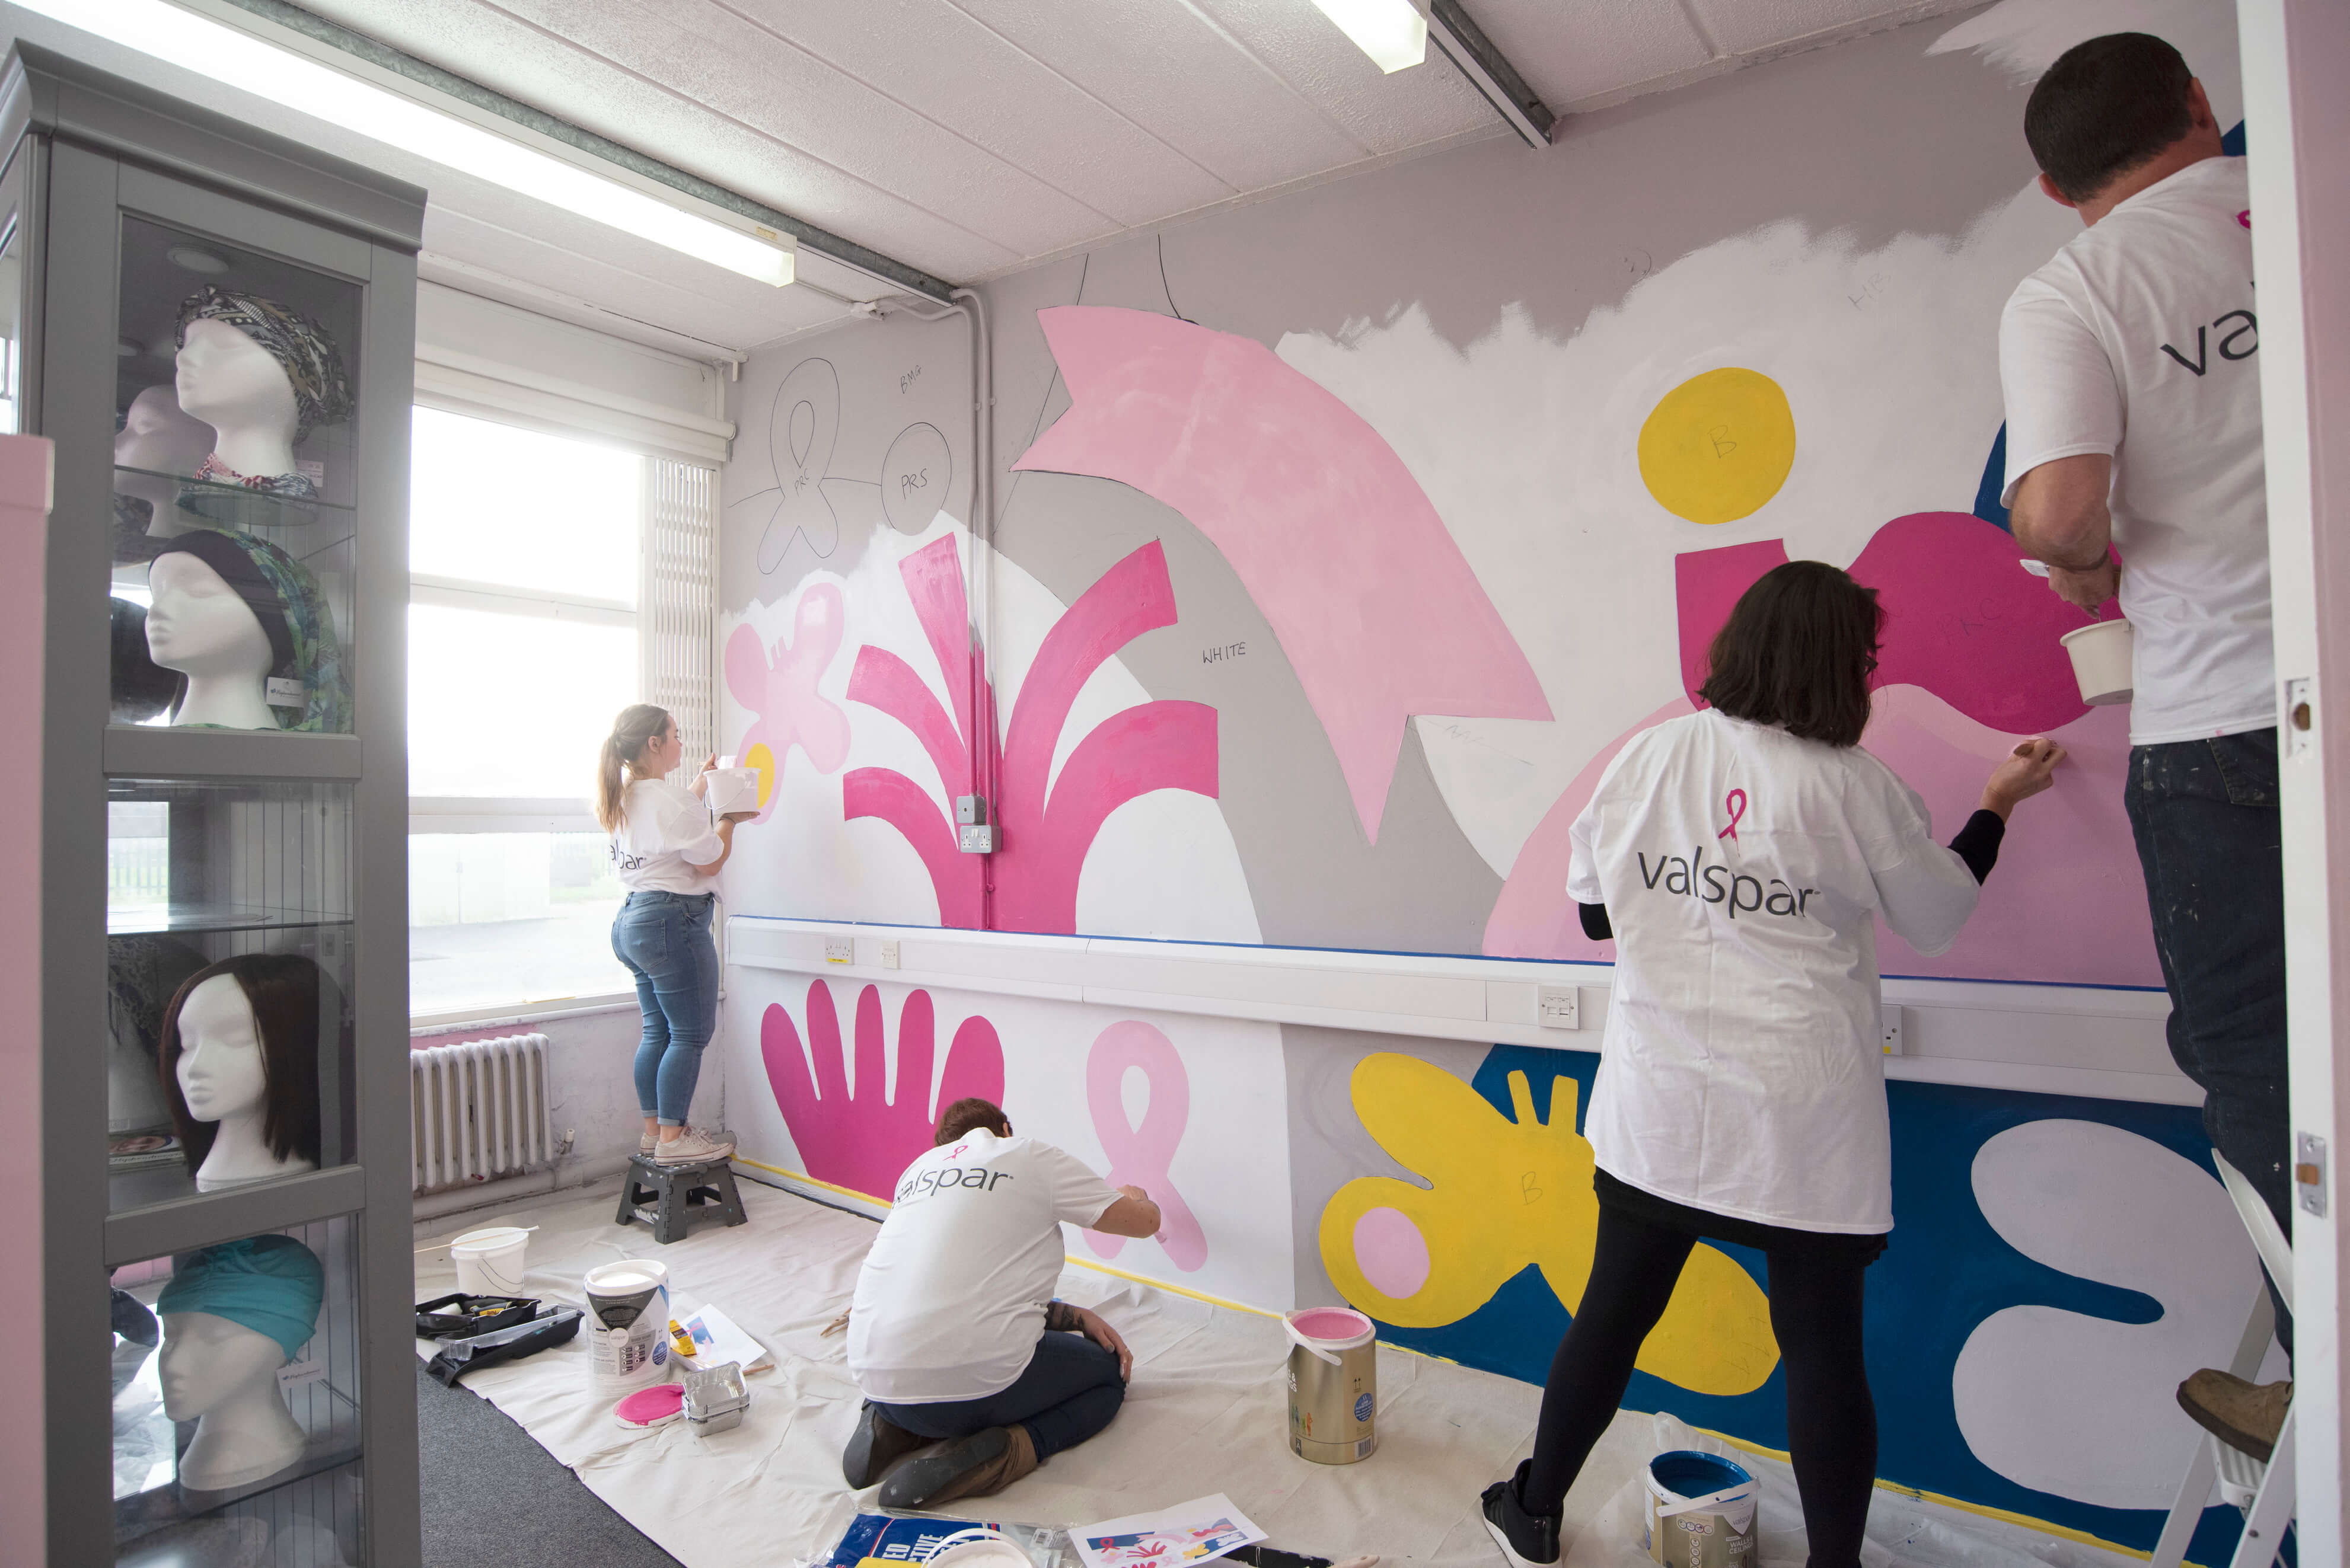 Birmingham Cancer Support Centre Given a Colourful Makeover